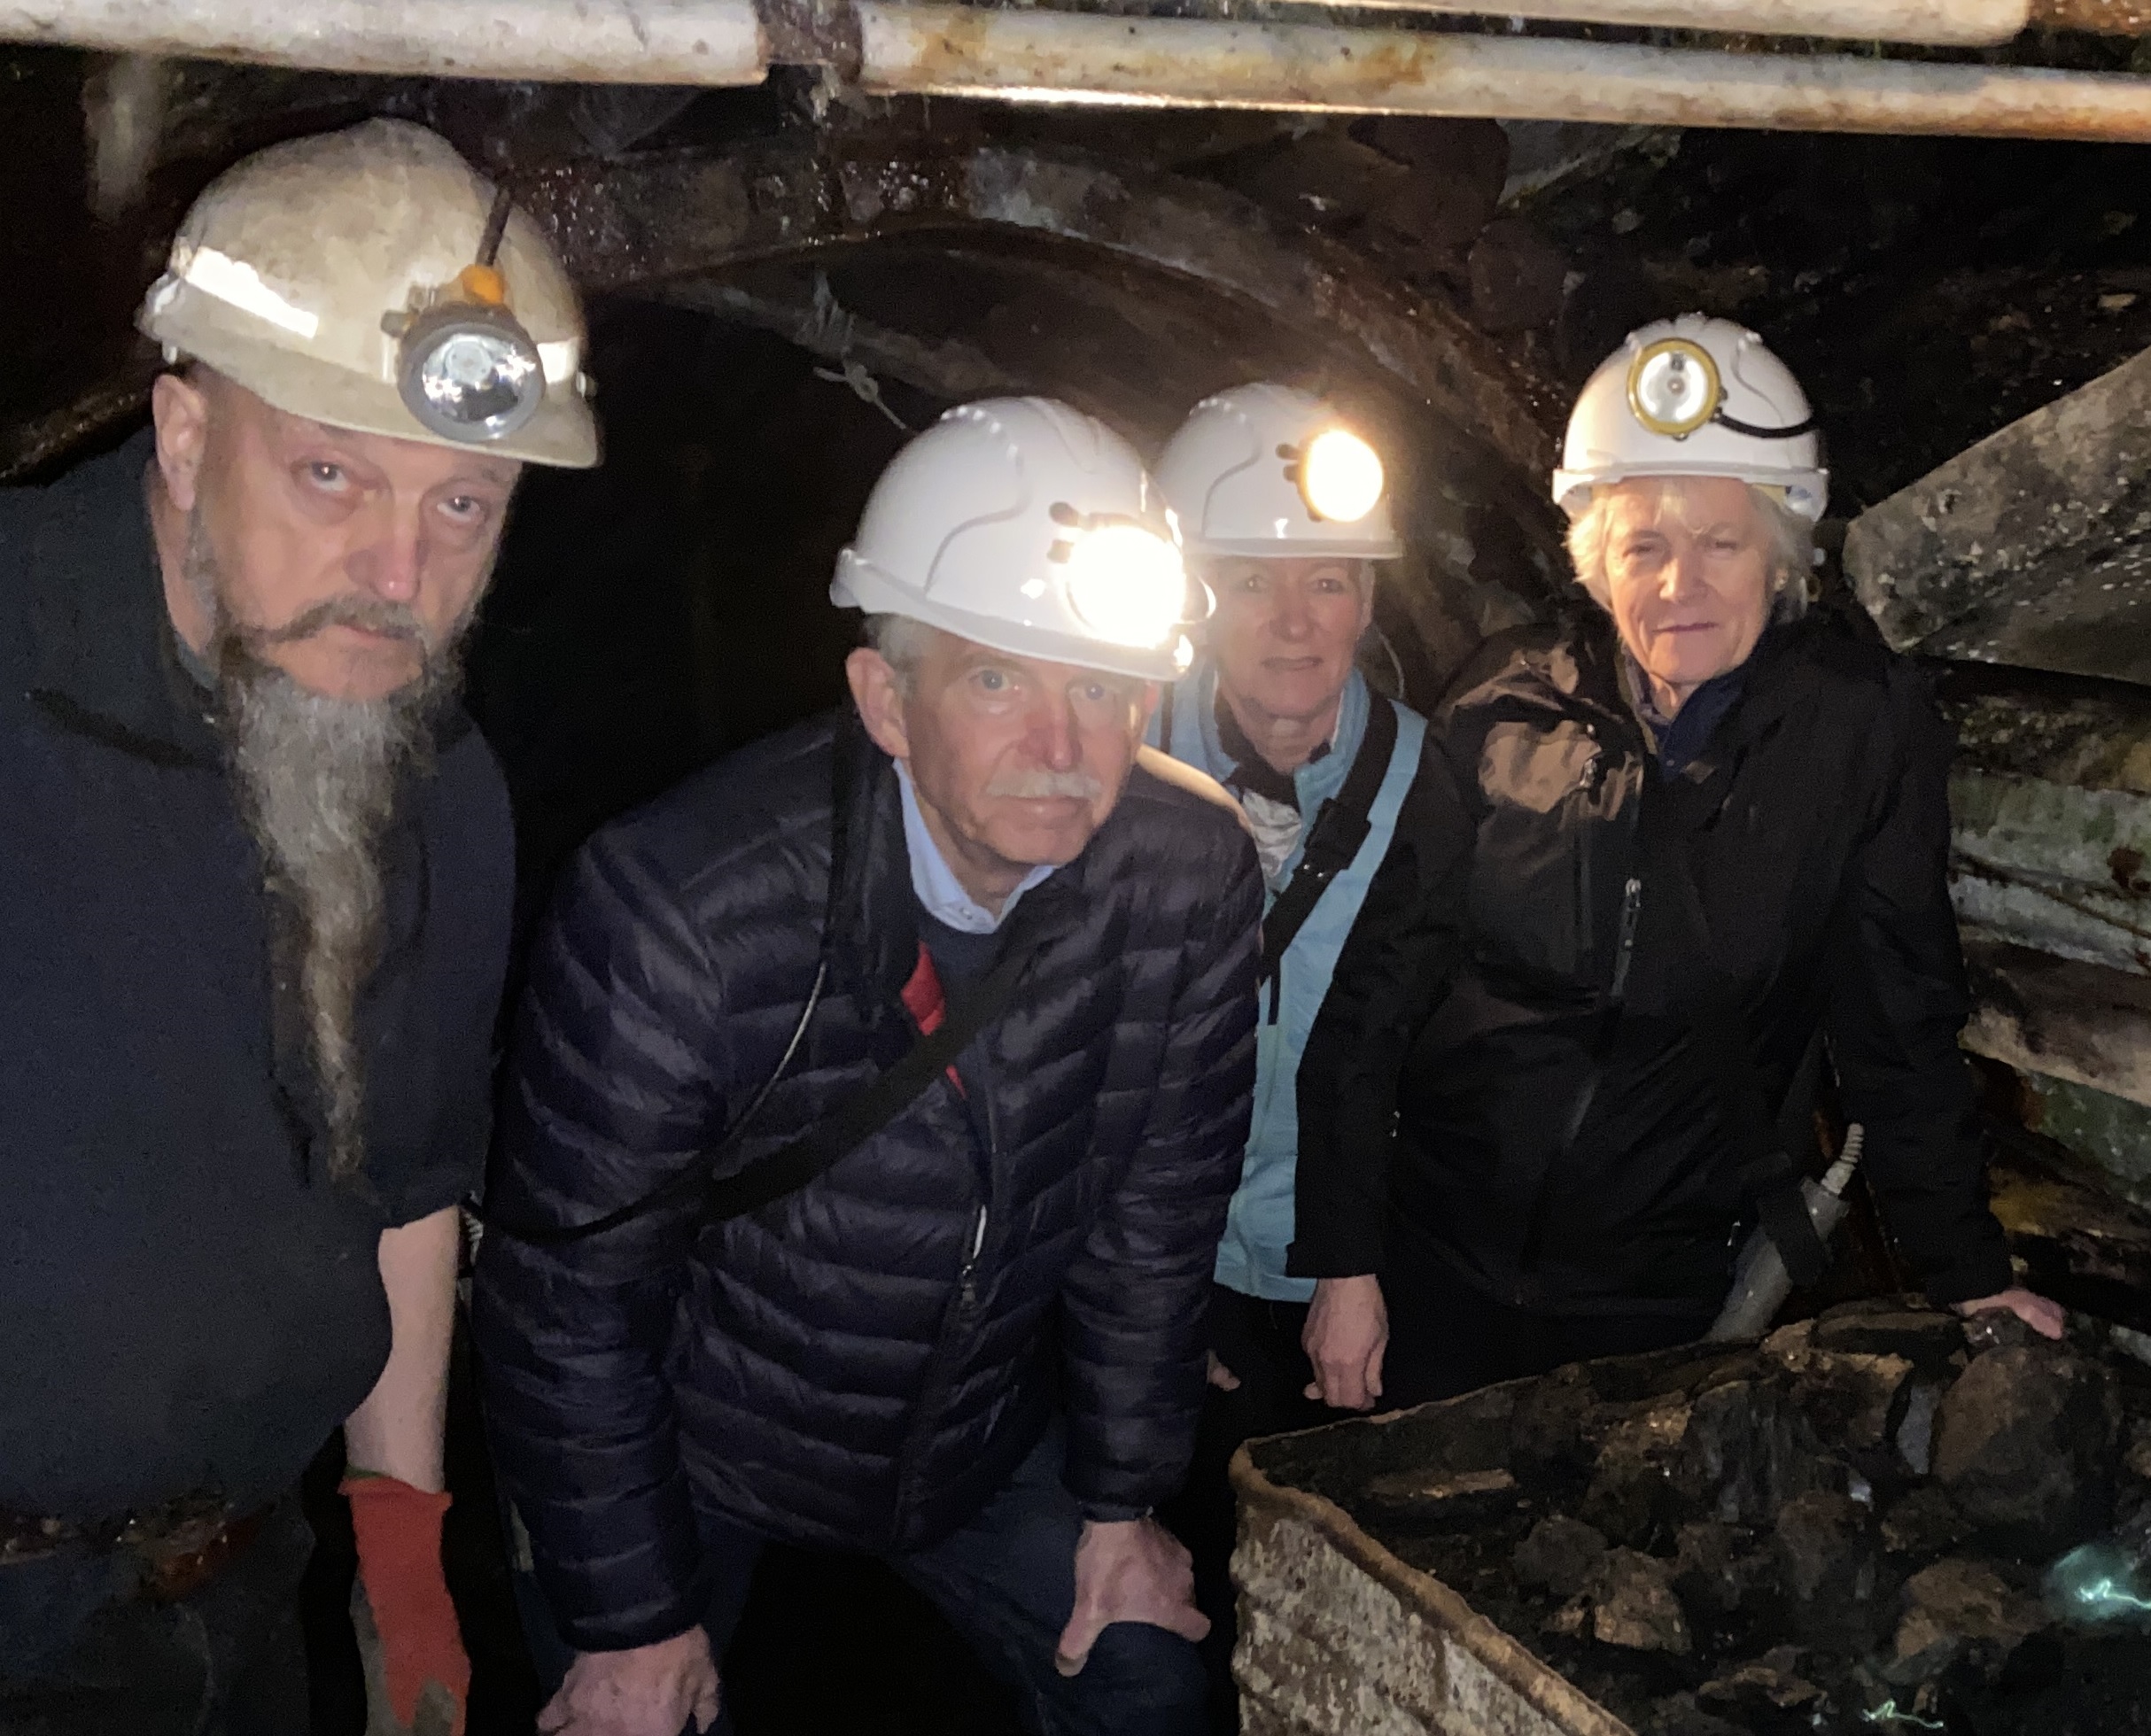 22 February 2023 – Visit to Hopewell Colliery with Richard Daniels MBE, a King’s Verderer, where I learned about free mining in the Forest of Dean, together with Ingrid Barker and Councillor Julia Gooch